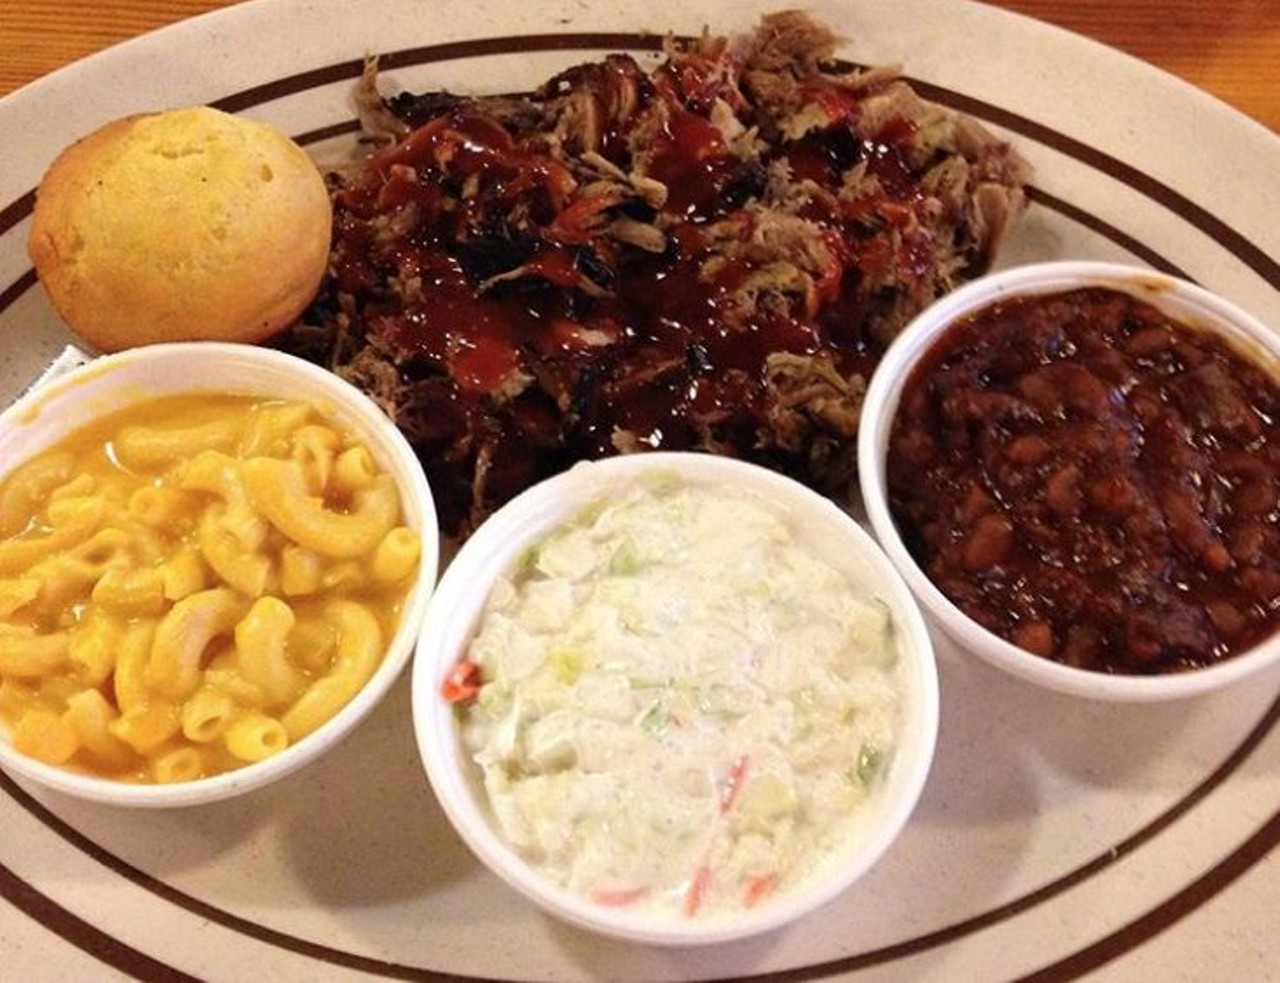 Try this:Can&#146;t go wrong with a classic like pulled pork and these sides.
Photo via jojobrie55/ Instagram